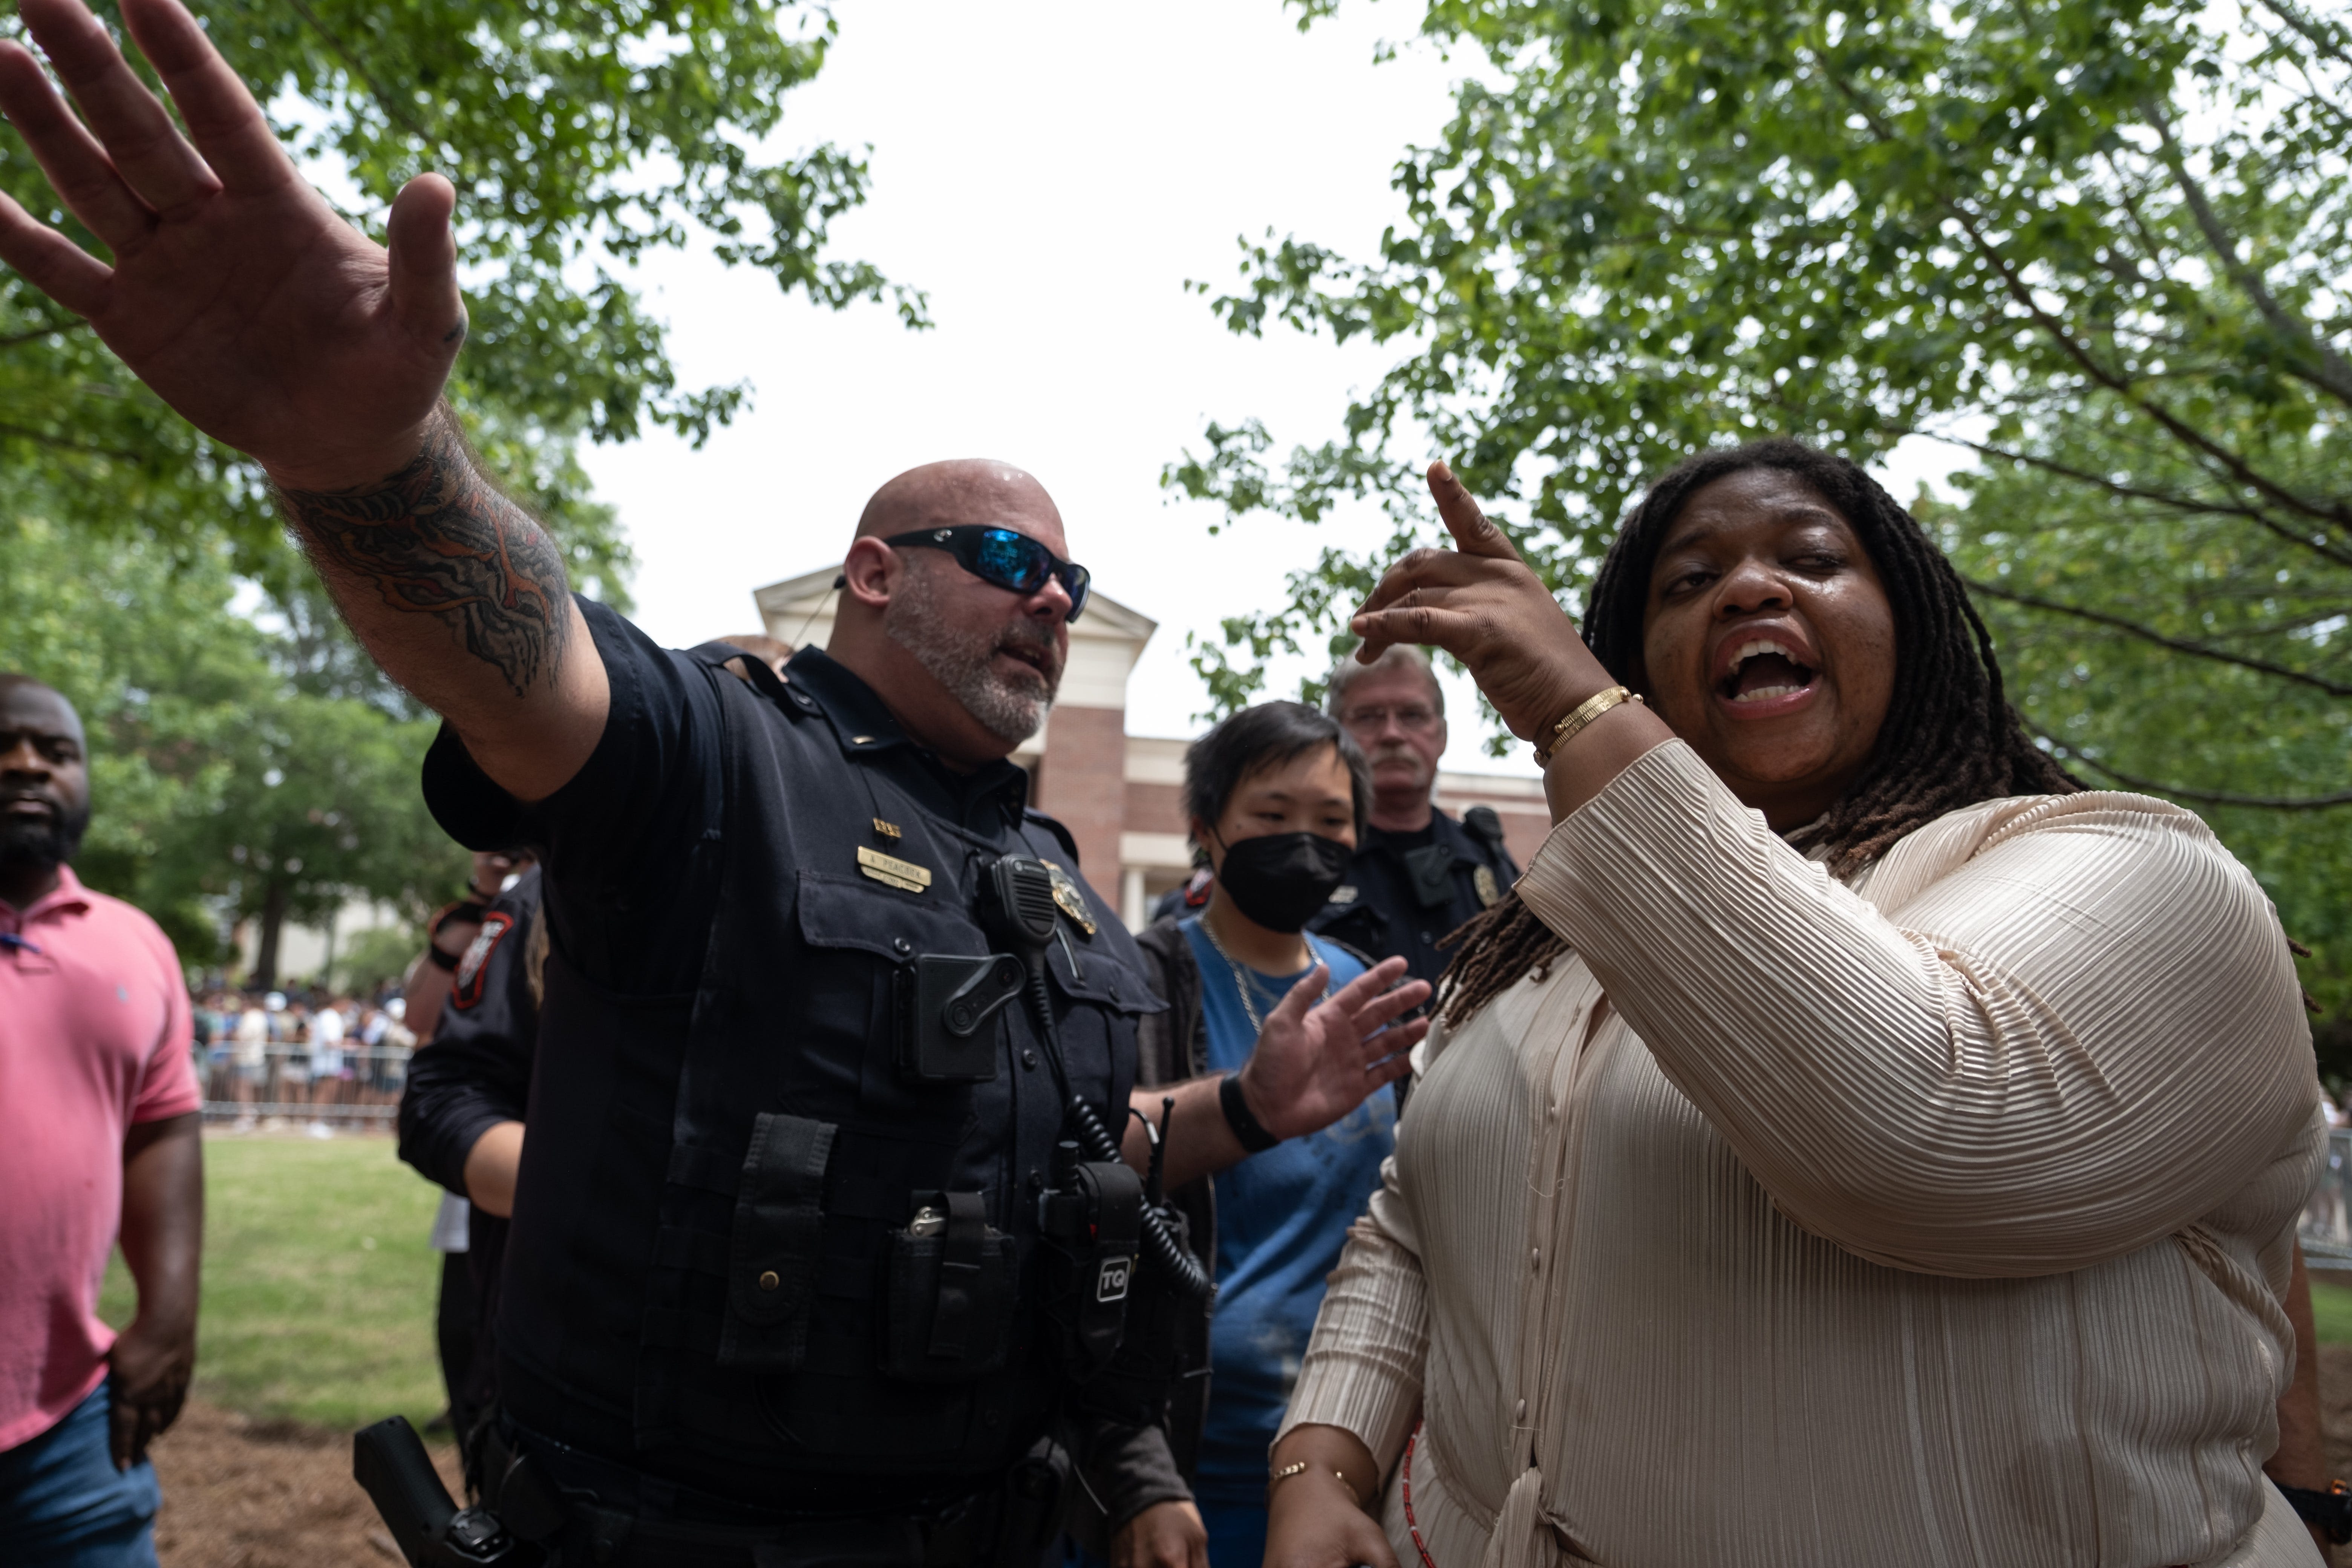 NAACP leaders at Ole Miss call for expulsion of 3 counter protestors after racist taunts